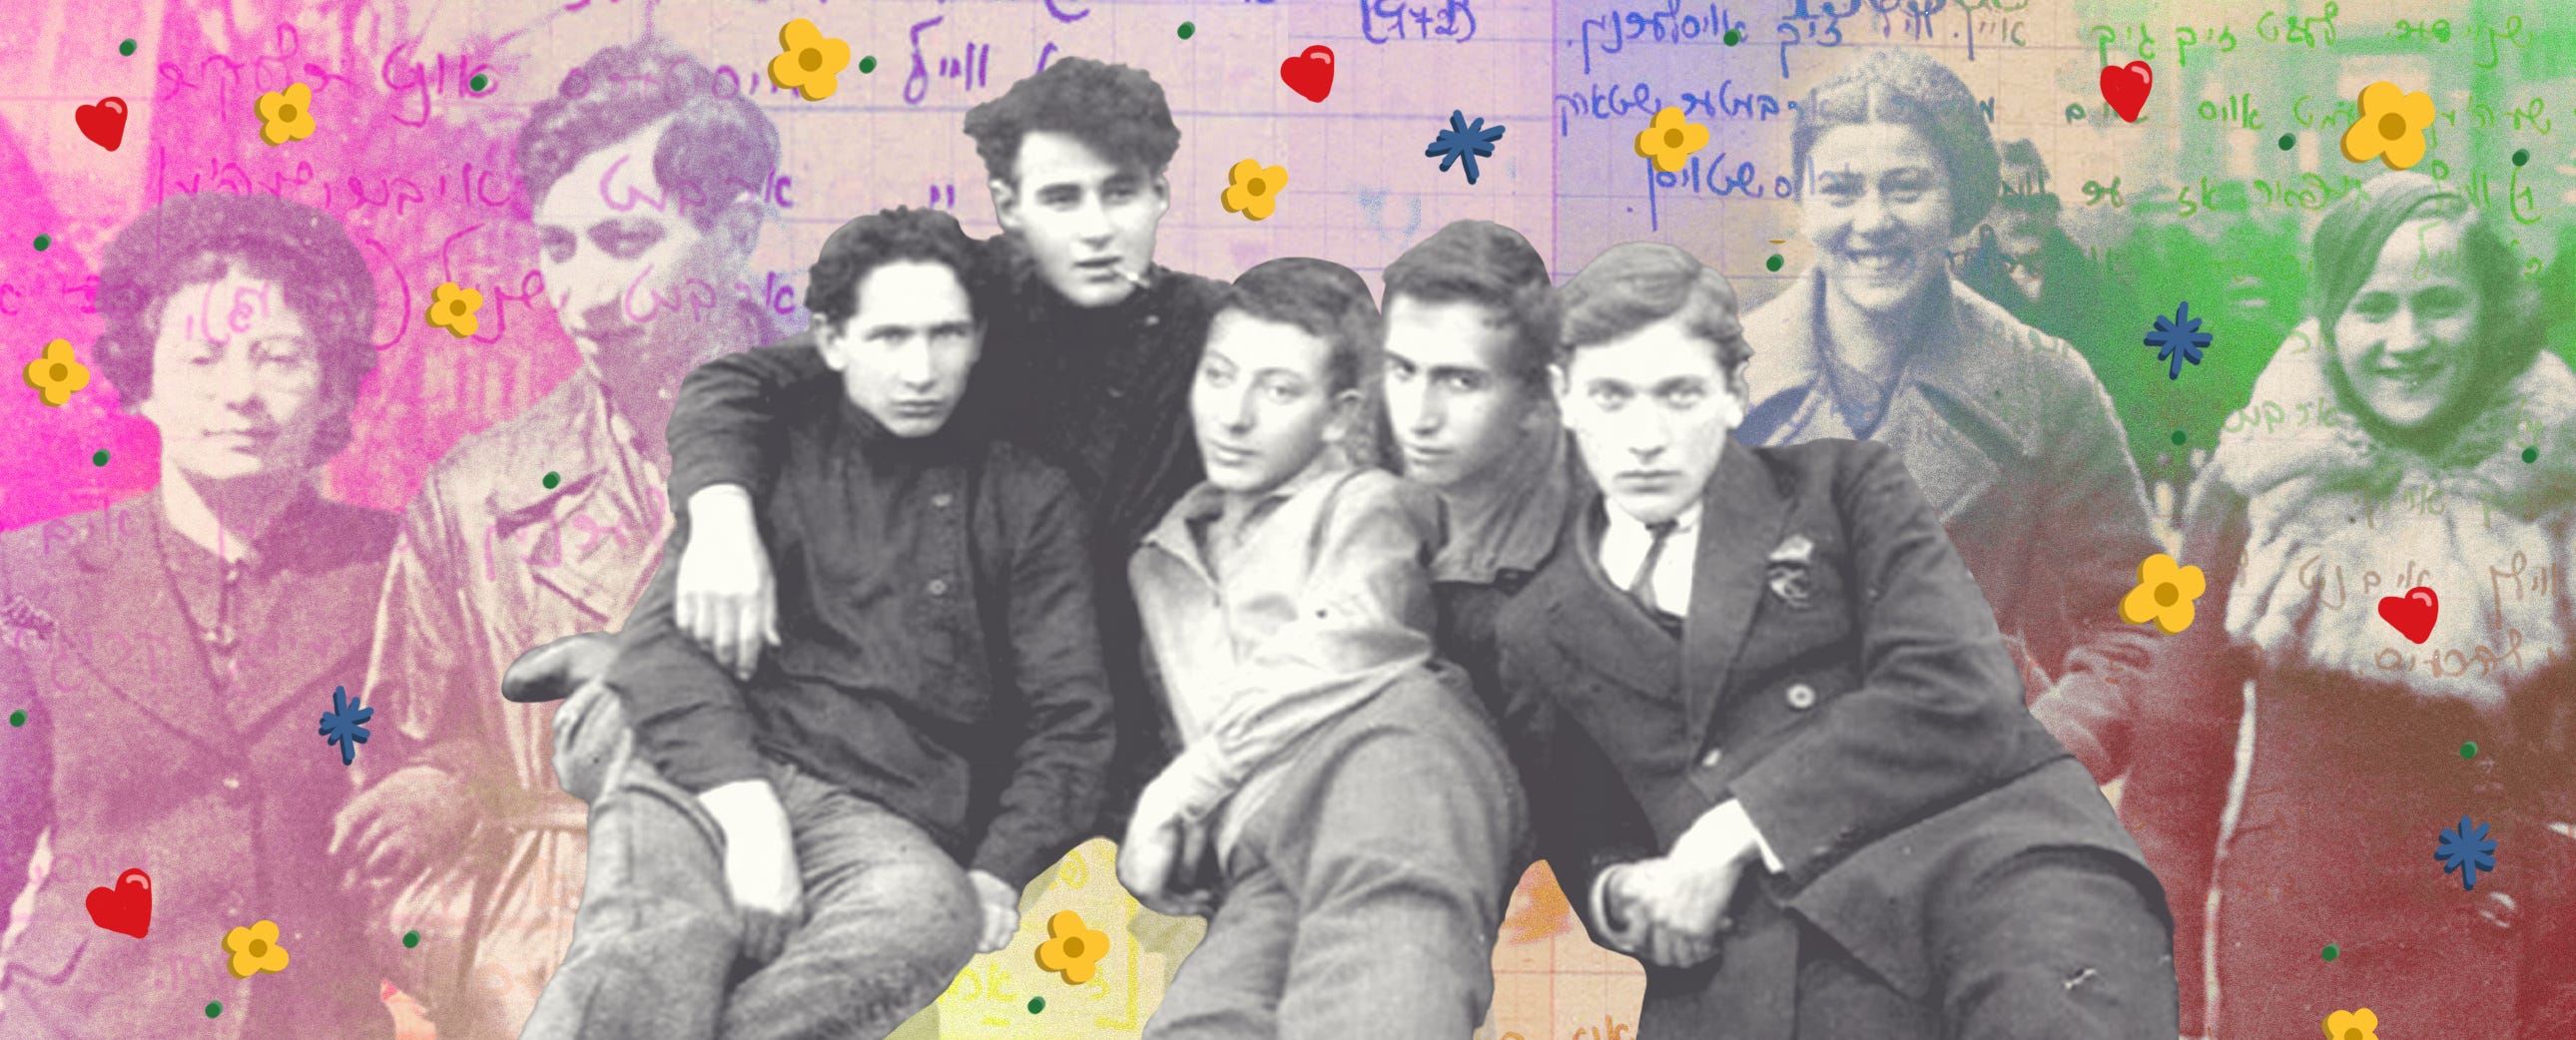 These Forgotten Essays Reveal the Secrets and Dreams of Jewish Teens As Hitler Drew Near